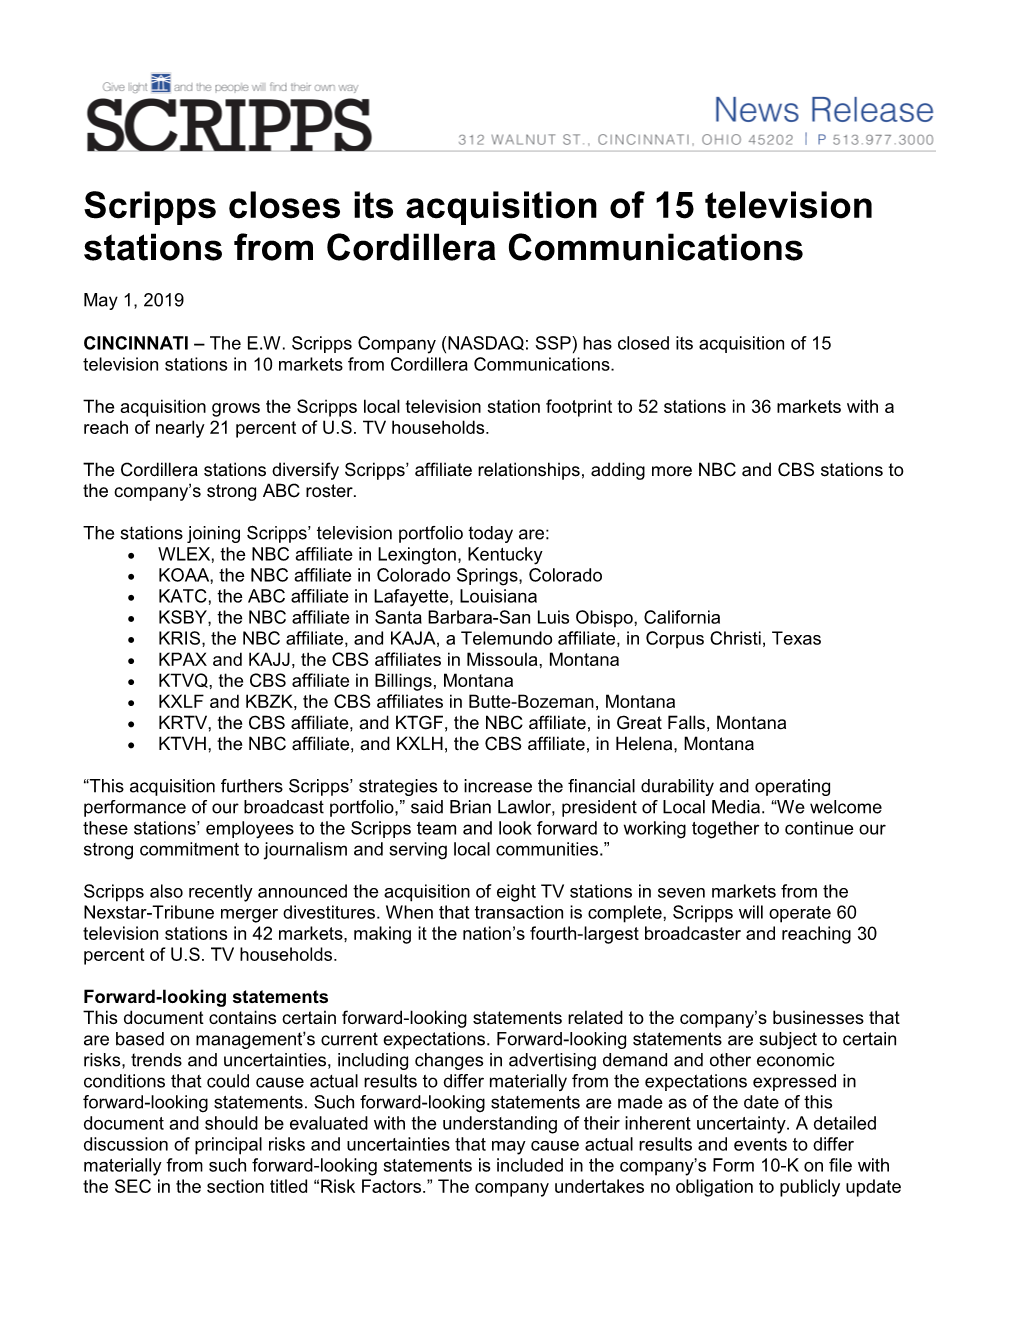 Scripps Closes Its Acquisition of 15 Television Stations from Cordillera Communications